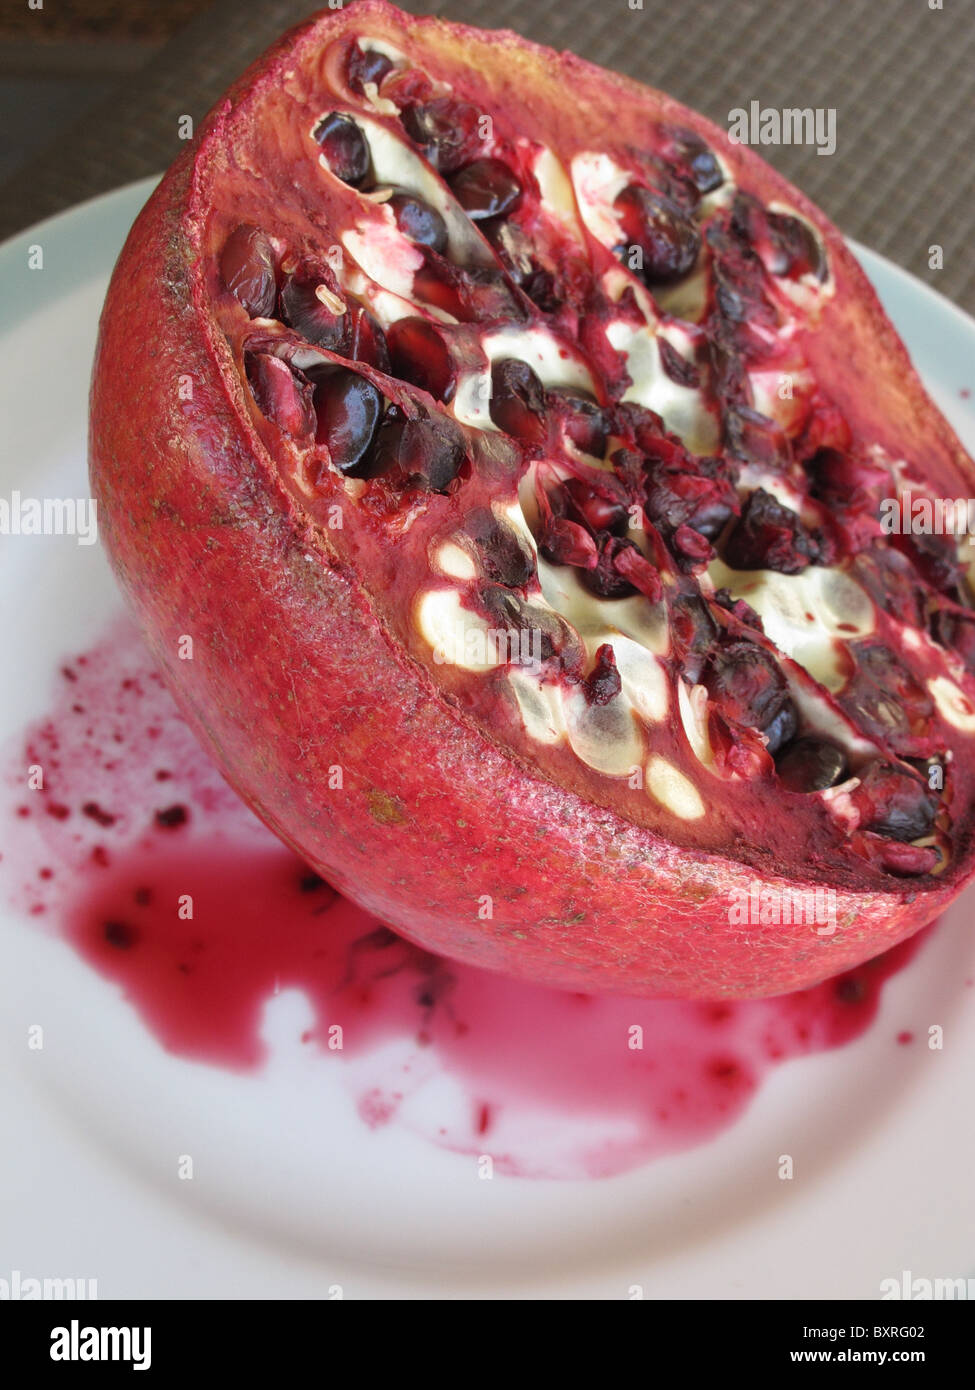 Old pomegranate on a white plate. Stock Photo